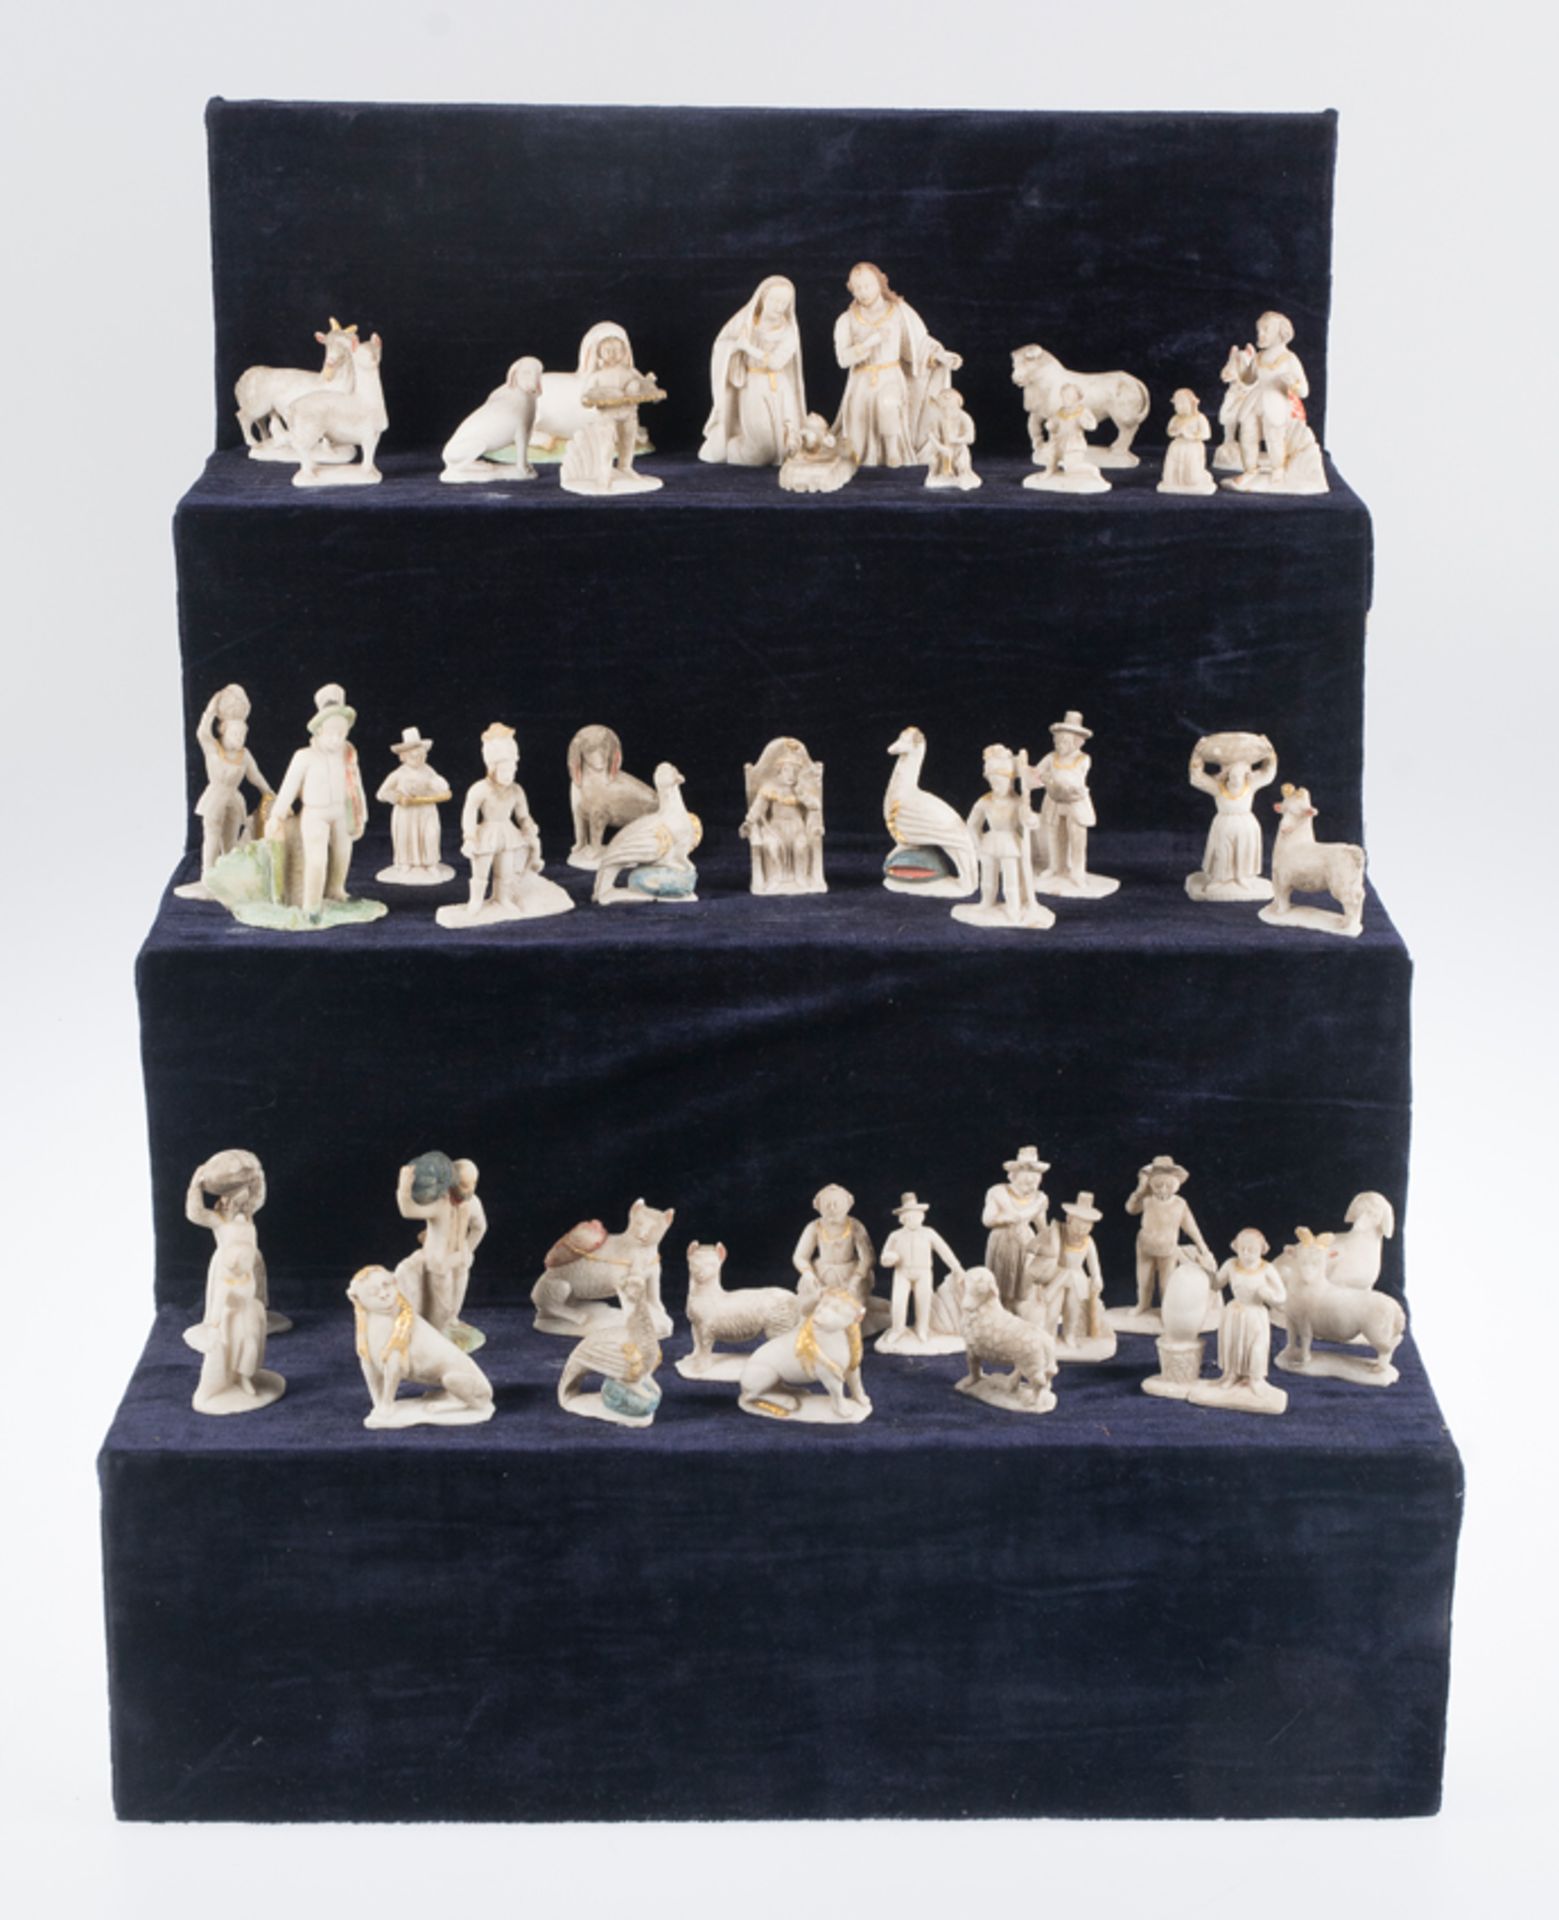 Imposing set of 44 sculpted huamanga stone figures that form a Nativity scene. Peru. 18th century.